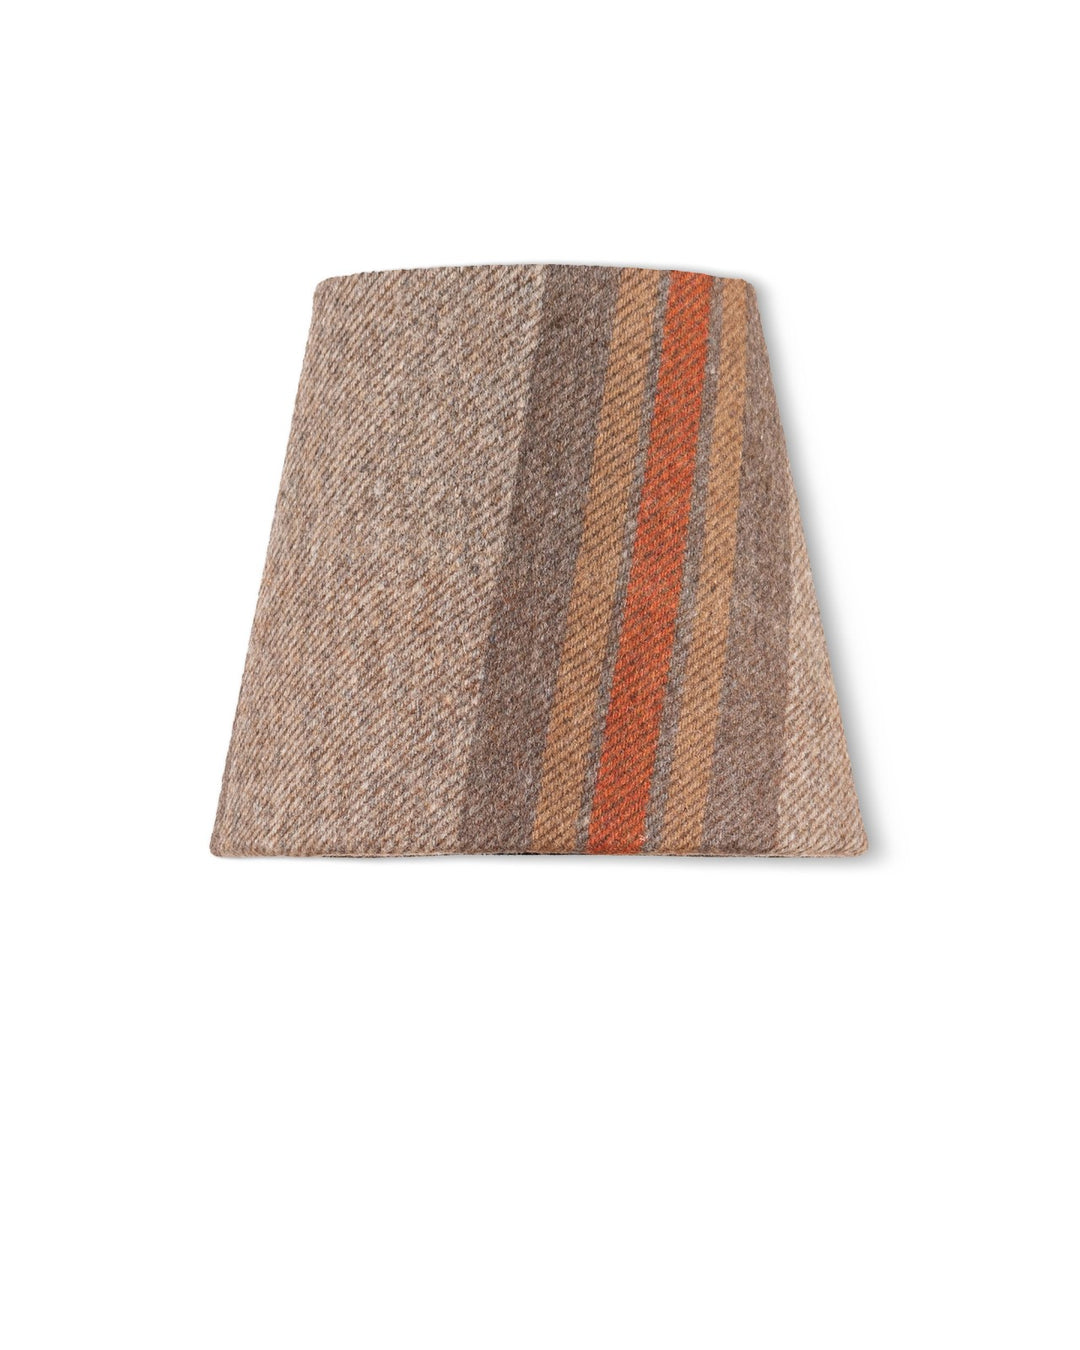 Mind-The-Gap-Tyrol-Collection-Chalet-Wool-Wall-Shade-Brown-stripes-Cabin-Apres-SKi-style-wall-scone-lamp-shade